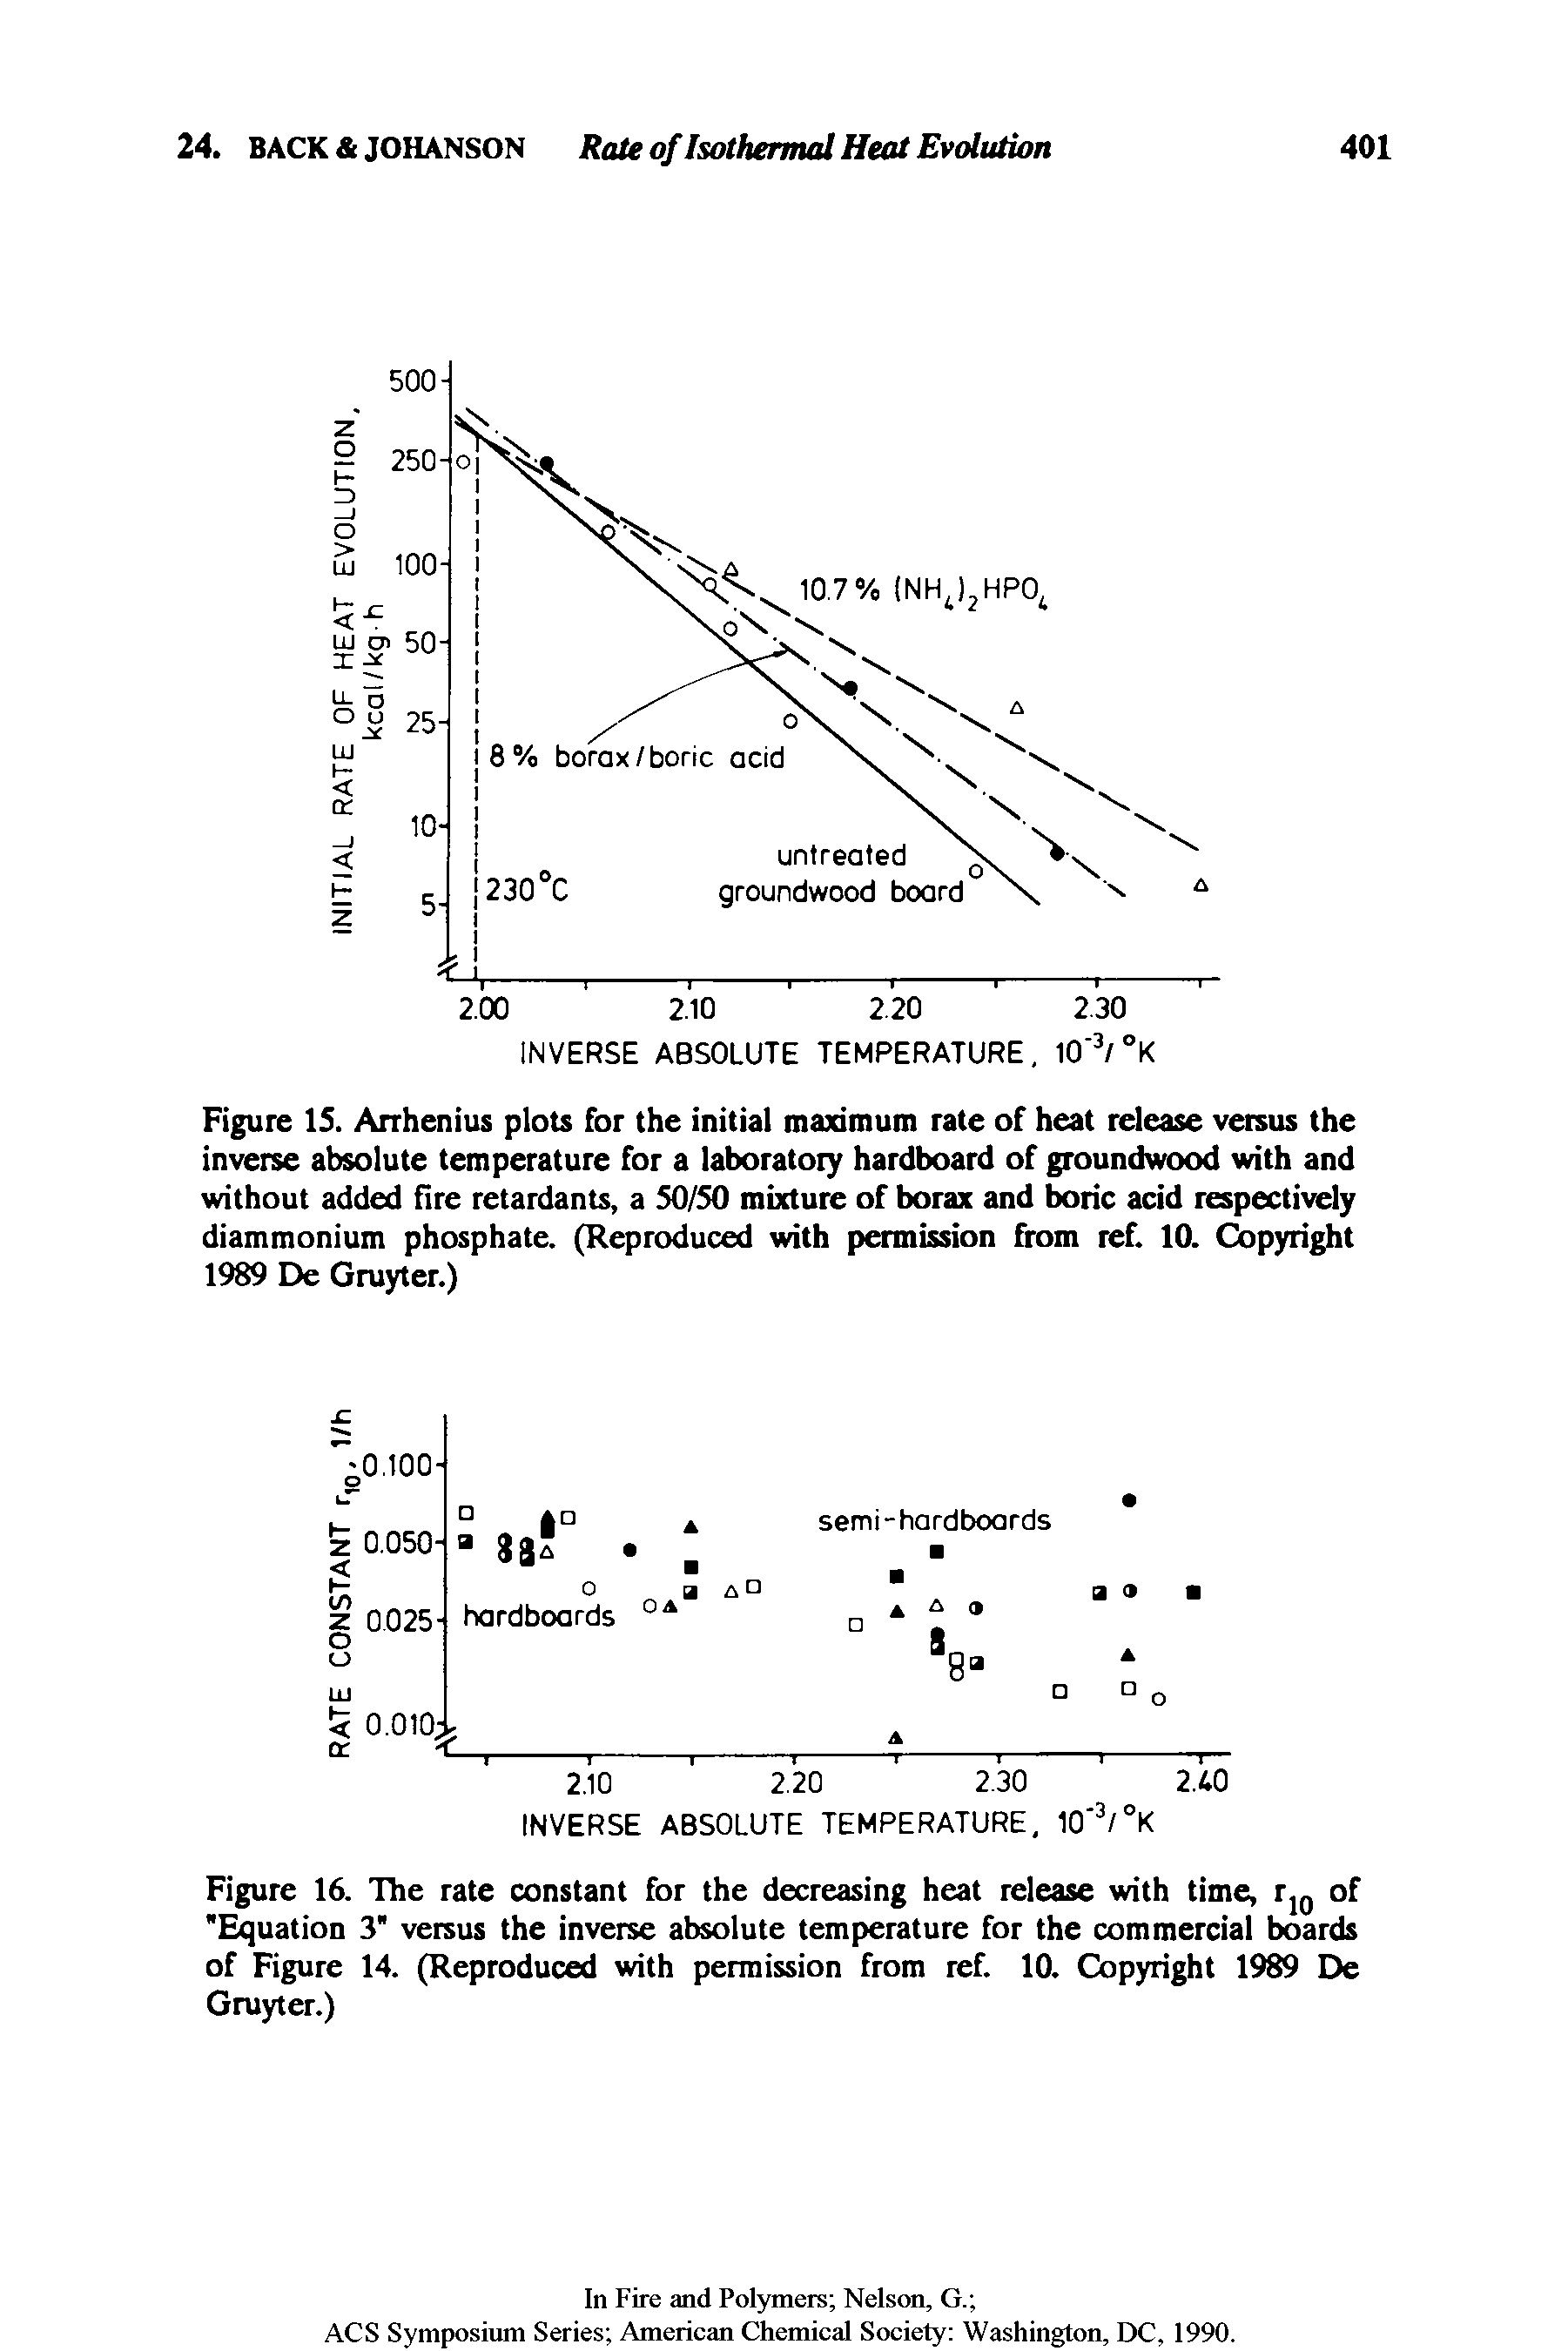 Figure IS. Arrhenius plots for the initial maximum rate of heat release versus the inverse absolute temperature for a laboratory hardboard of groundwood with and without added fire retardants, a 50/50 mixture of borax and boric acid respectively diammonium phosphate. (Reproduced with permission from ref. 10. Copyright 1989 De Gruyter.)...